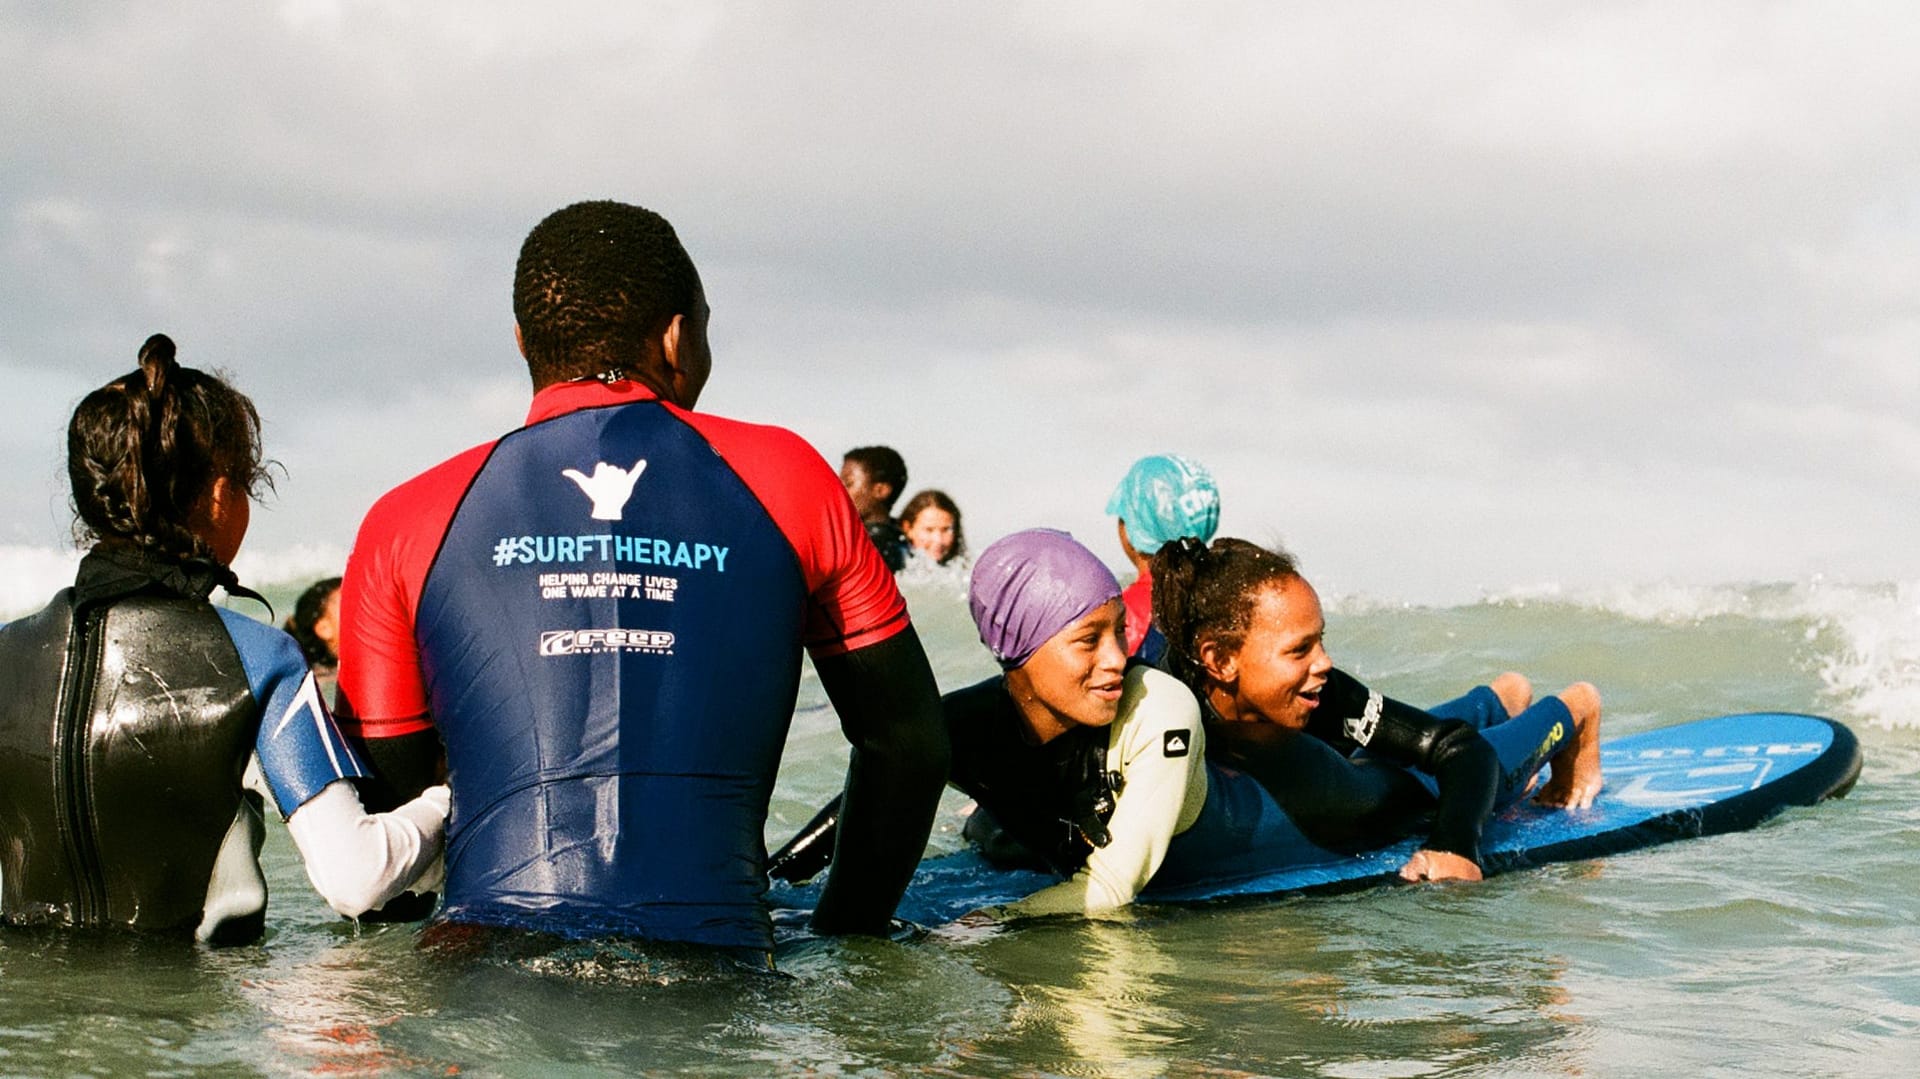 Image: two children in the ocean on a surfboard being held in place by a coach who sports a #SurfTherapy graphic on their shirt